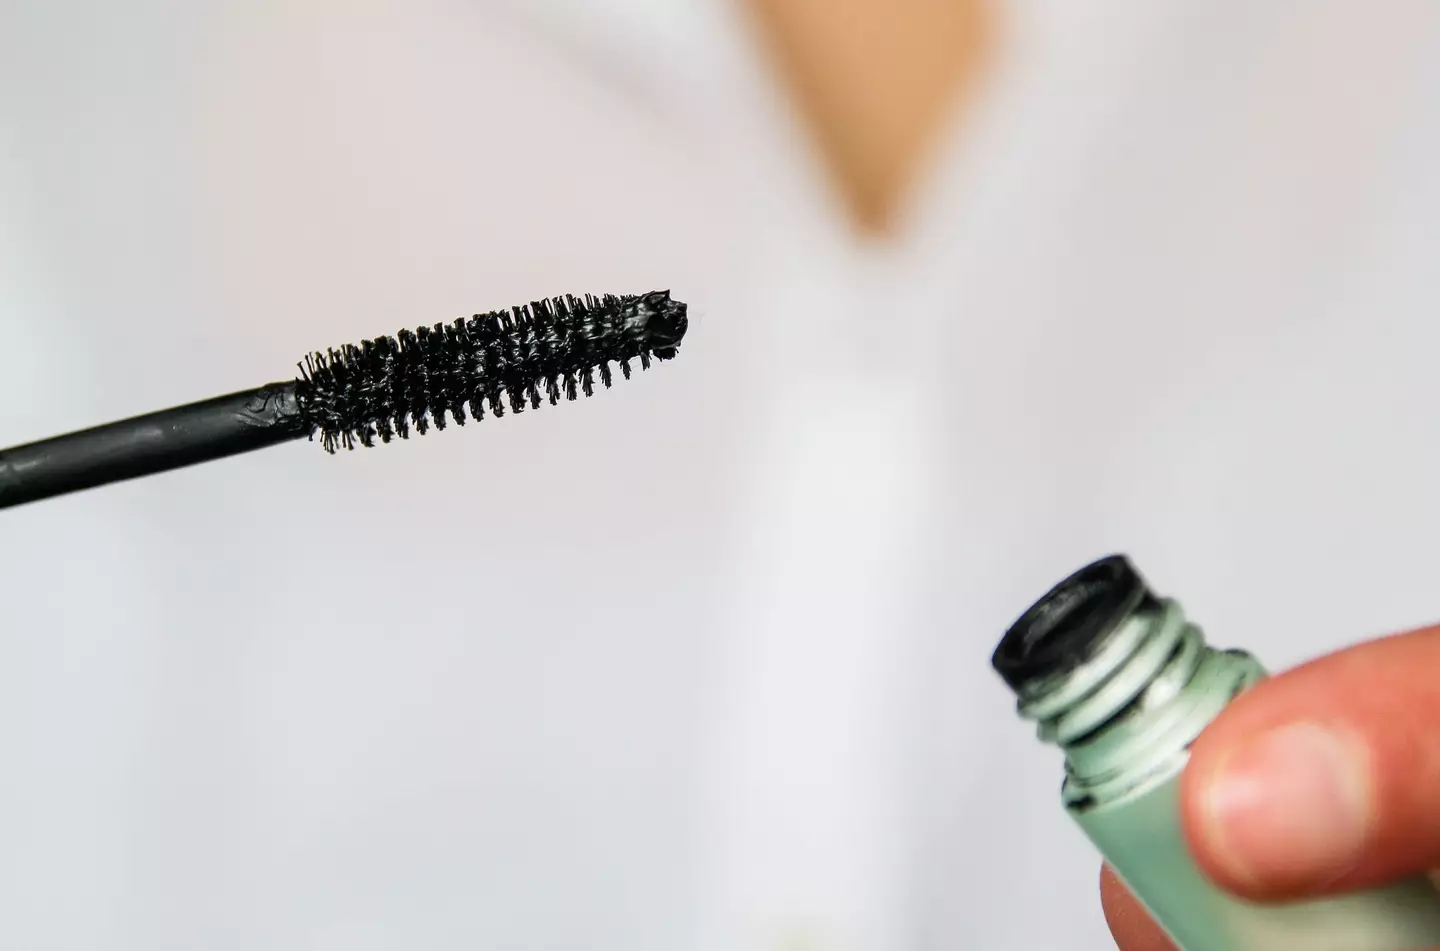 Expired mascara can cause conjunctivitis.